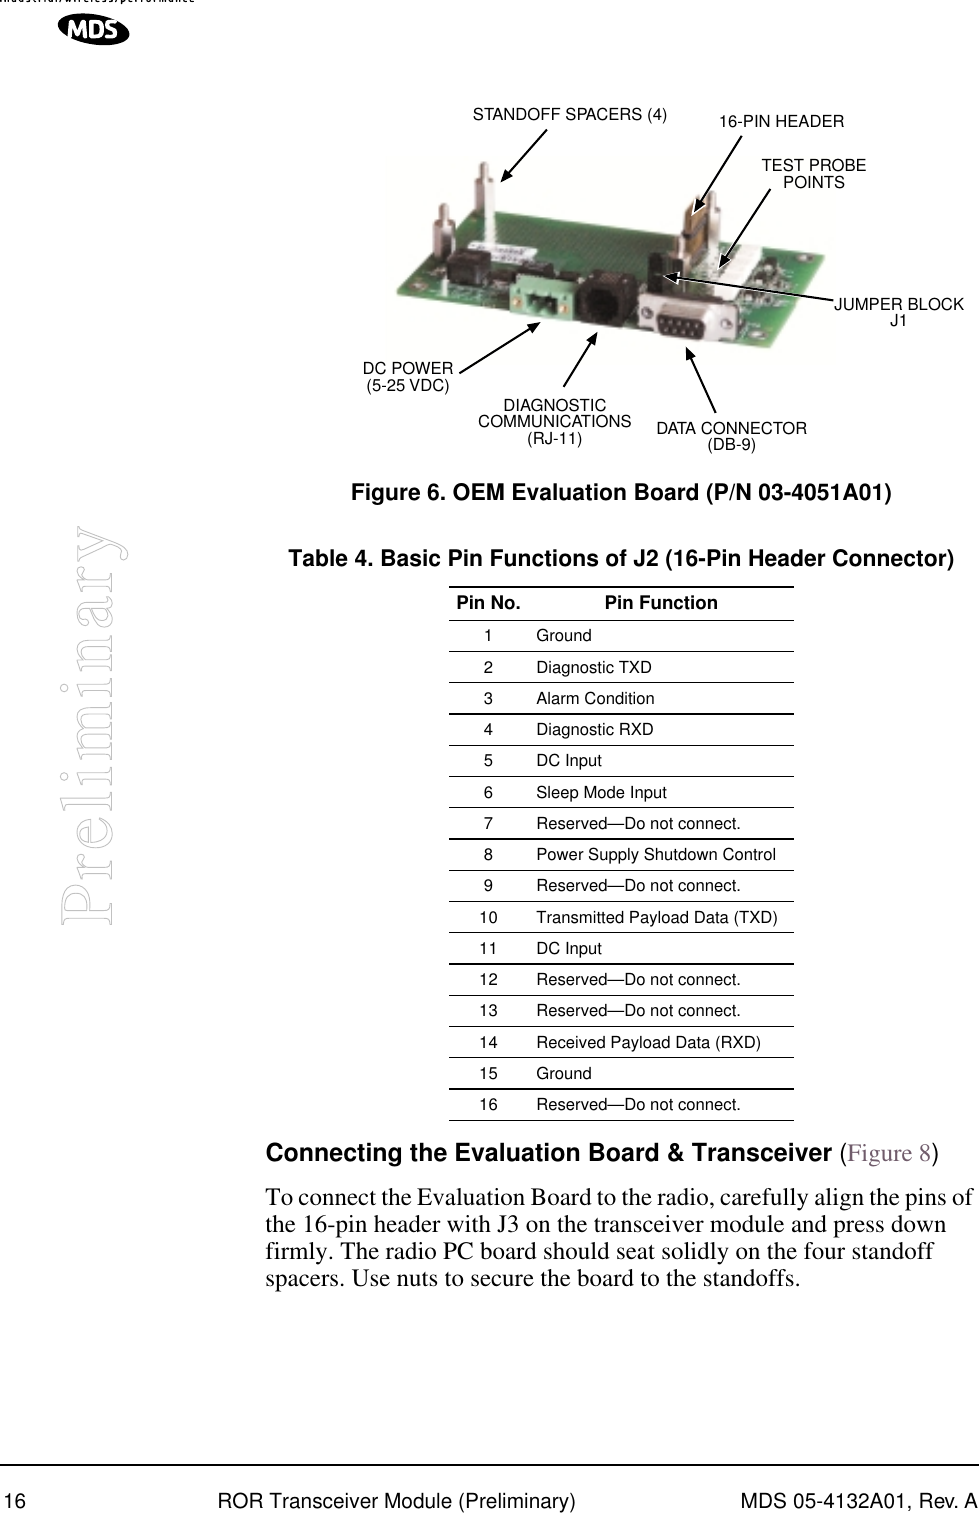 16 ROR Transceiver Module (Preliminary) MDS 05-4132A01, Rev. APreliminaryFigure 6. OEM Evaluation Board (P/N 03-4051A01)Connecting the Evaluation Board &amp; Transceiver (Figure 8)To connect the Evaluation Board to the radio, carefully align the pins of the 16-pin header with J3 on the transceiver module and press down firmly. The radio PC board should seat solidly on the four standoff spacers. Use nuts to secure the board to the standoffs.Table 4. Basic Pin Functions of J2 (16-Pin Header Connector)Pin No. Pin Function1 Ground2 Diagnostic TXD3 Alarm Condition4 Diagnostic RXD5 DC Input6 Sleep Mode Input7 Reserved—Do not connect.8 Power Supply Shutdown Control9 Reserved—Do not connect.10 Transmitted Payload Data (TXD)11 DC Input12 Reserved—Do not connect.13 Reserved—Do not connect.14 Received Payload Data (RXD)15 Ground16 Reserved—Do not connect.TEST PROBEPOINTSDIAGNOSTICCOMMUNICATIONS(RJ-11) DATA CONNECTOR(DB-9)DC POWER(5-25 VDC)STANDOFF SPACERS (4) 16-PIN HEADERJUMPER BLOCKJ1